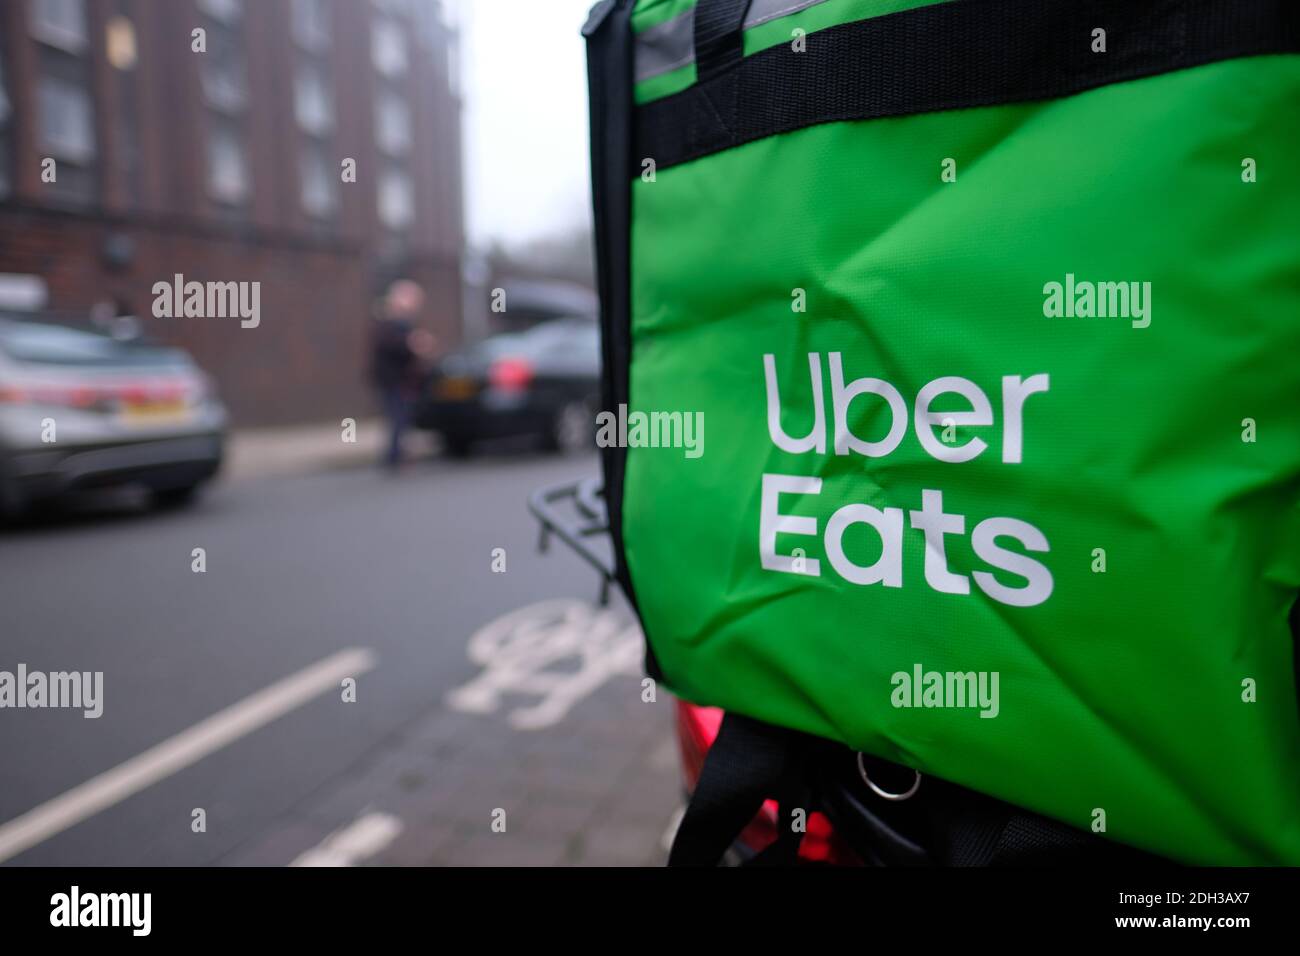 Cambridge UK December 2020 Closeup of a green Uber Eats delivery box on a  scooter, delivery guy picking up the food order Stock Photo - Alamy